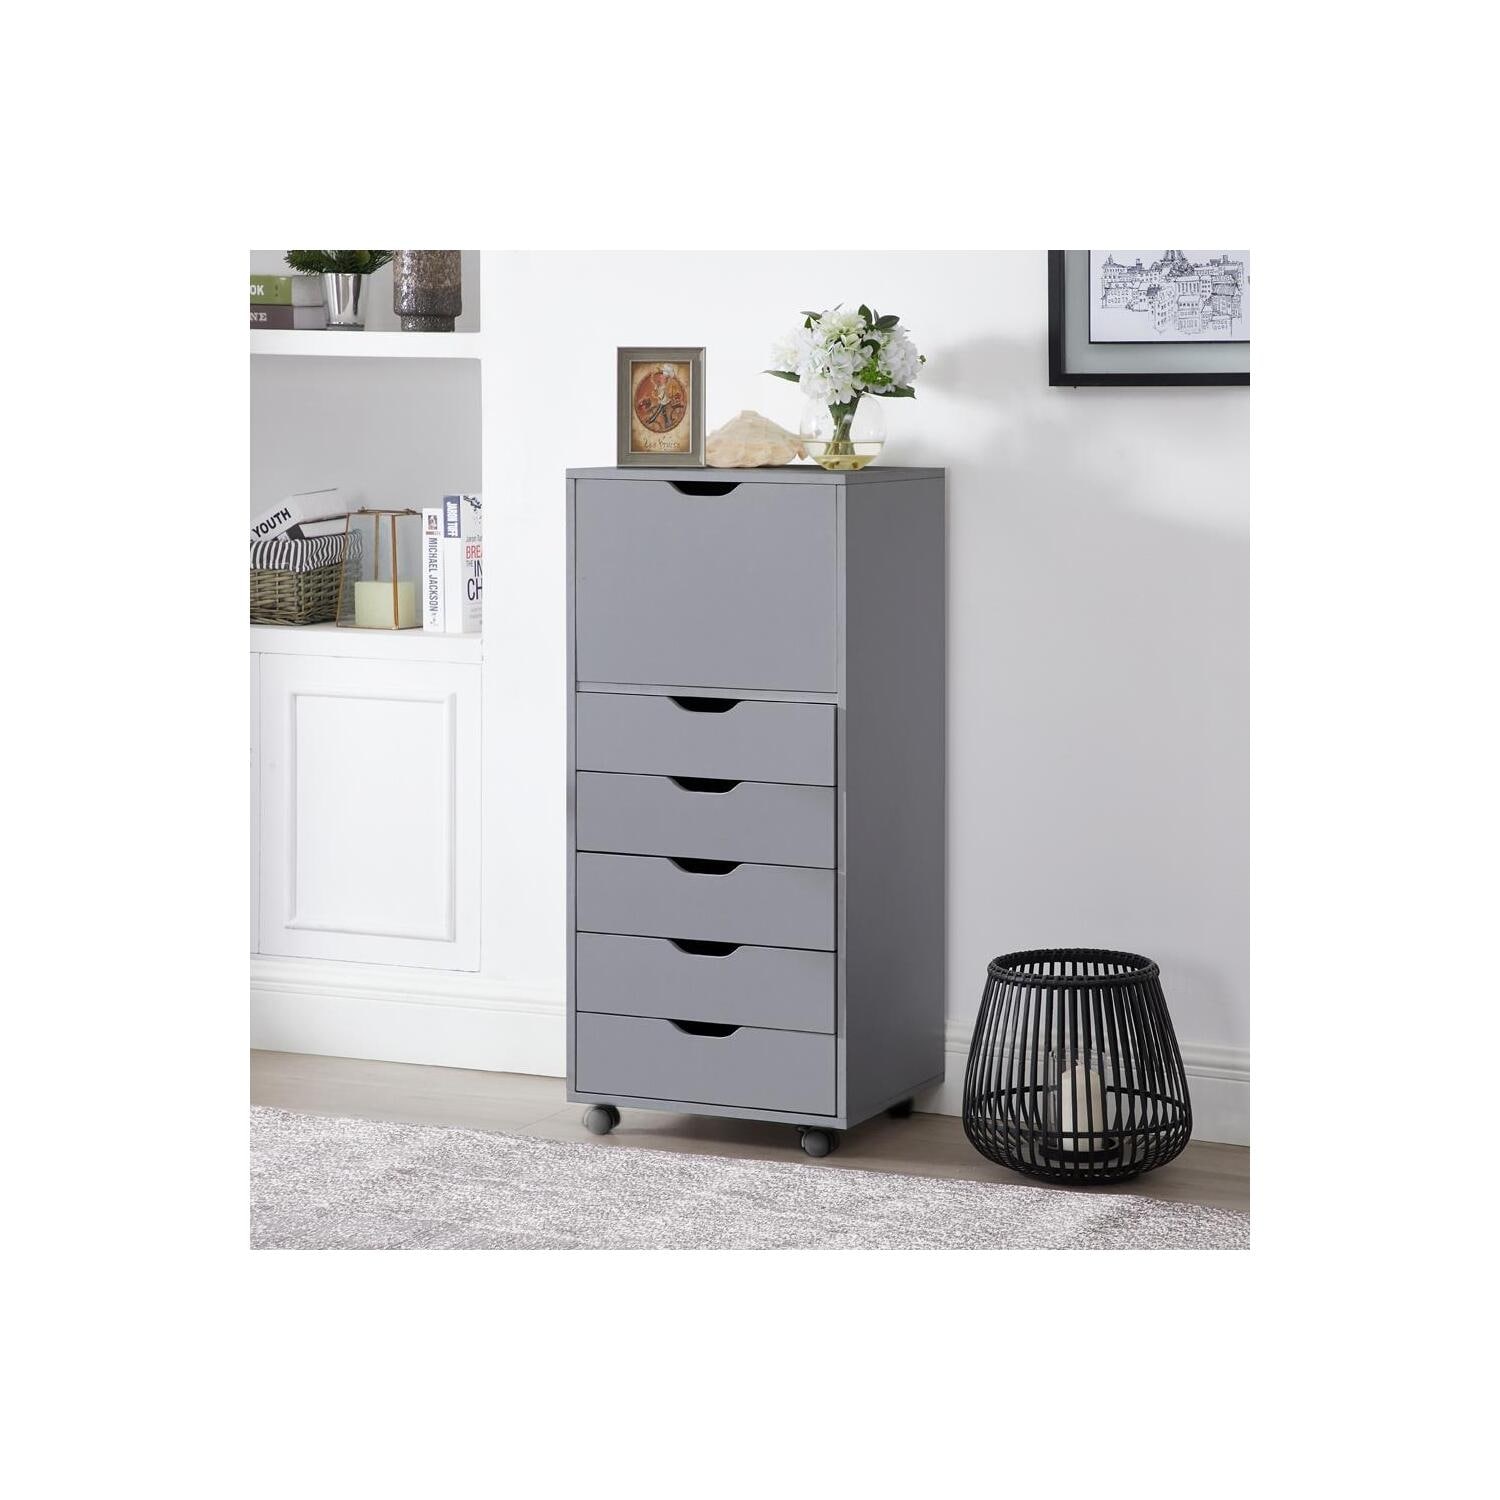 https://ak1.ostkcdn.com/images/products/is/images/direct/20dd501d15bc707c430d3bd521670c49a88d3d91/Naomi-Home-Carly-6-Drawer-Office-Storage-Cabinet%2C-Gray.jpg